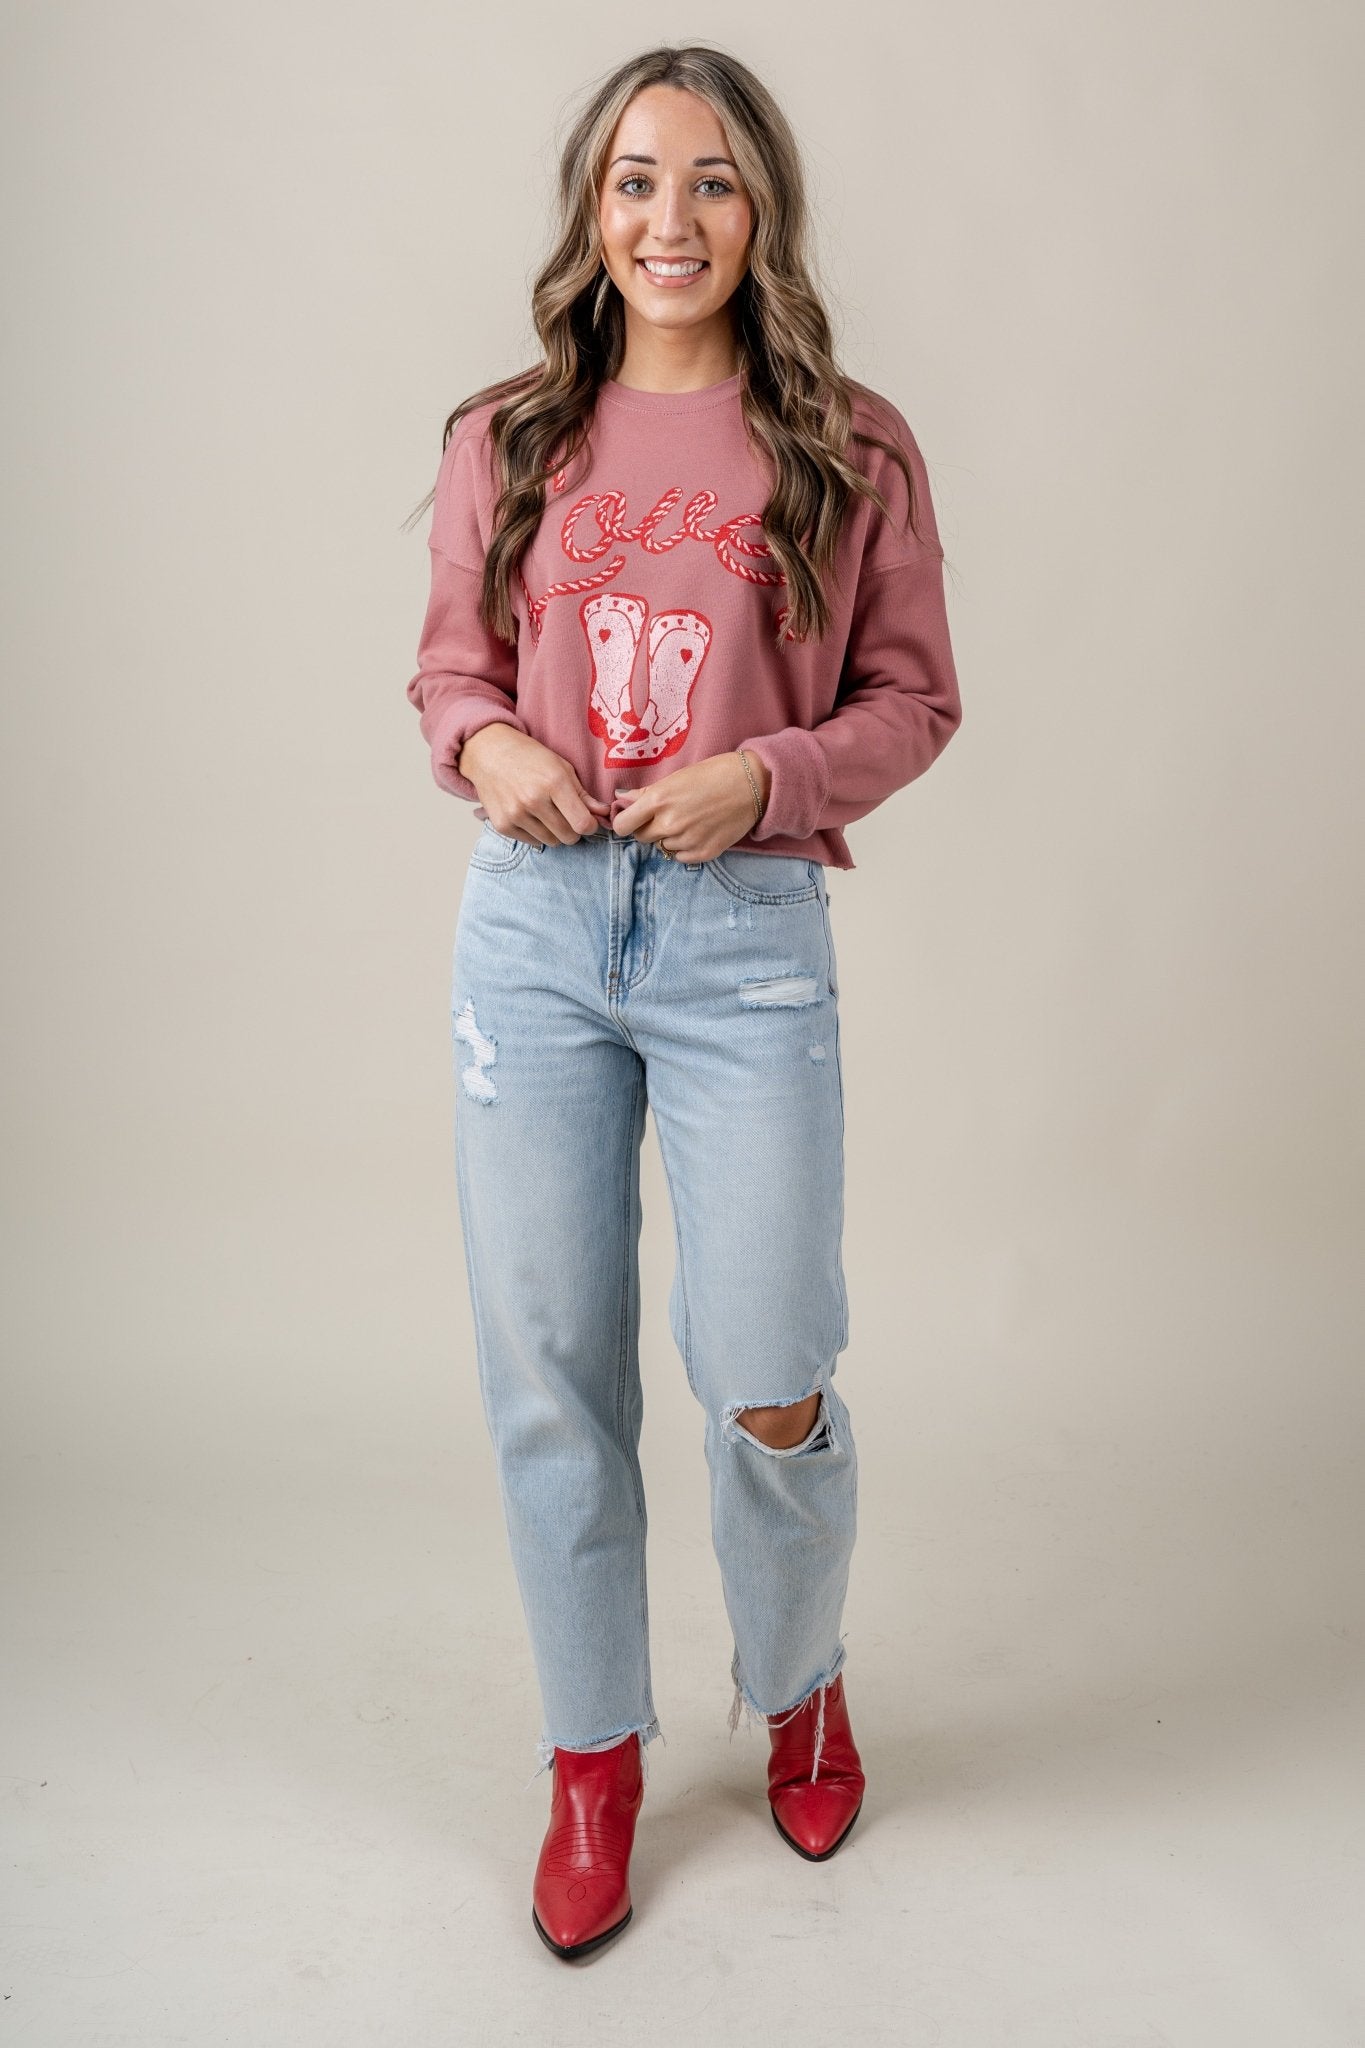 Lover cowboy boot cropped sweatshirt mauve - Cute Valentine's Day Outfits at Lush Fashion Lounge Boutique in Oklahoma City